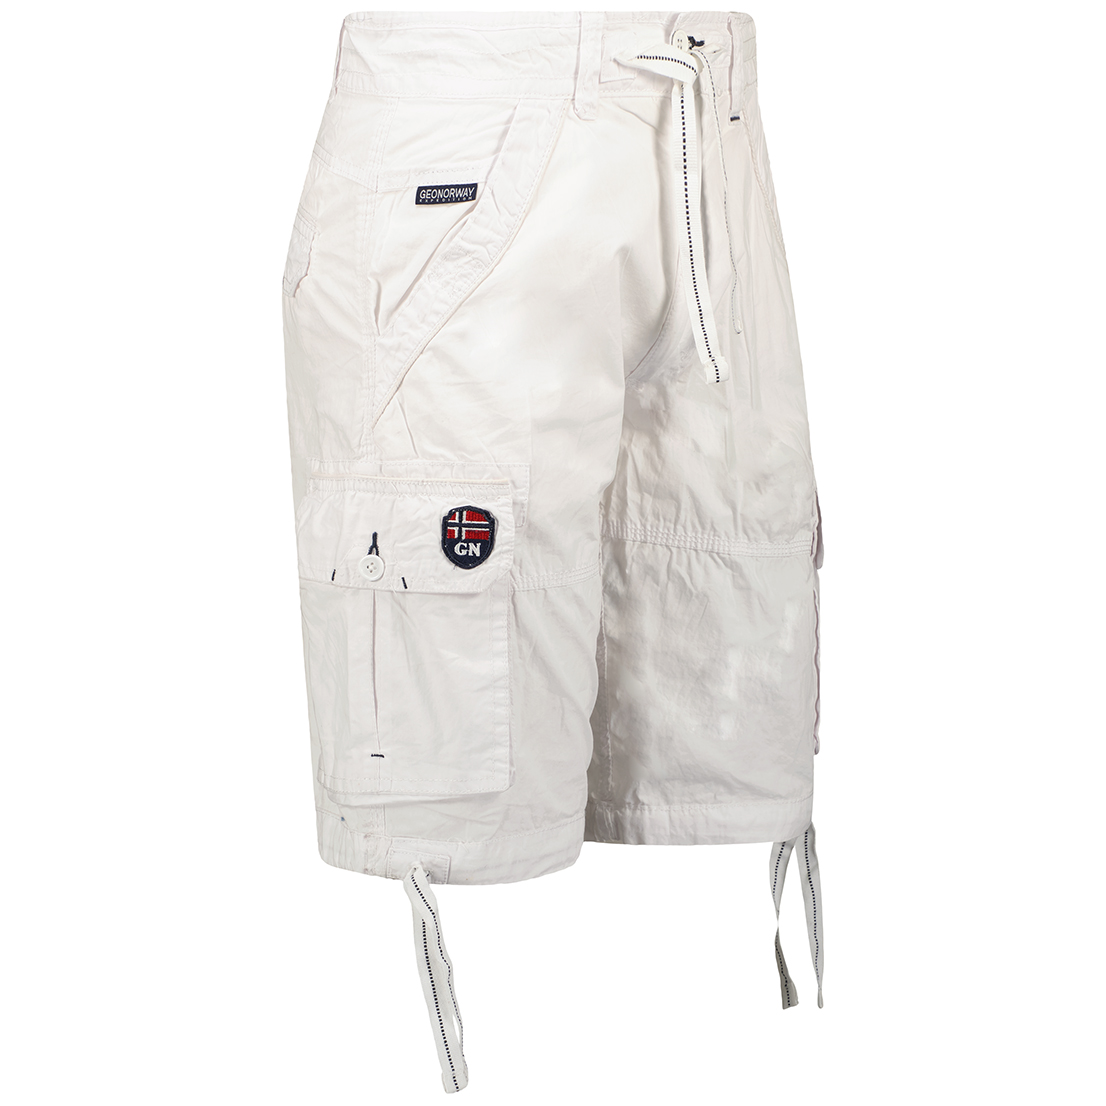 Cotton Shorts with Frogs and Zip Fastening